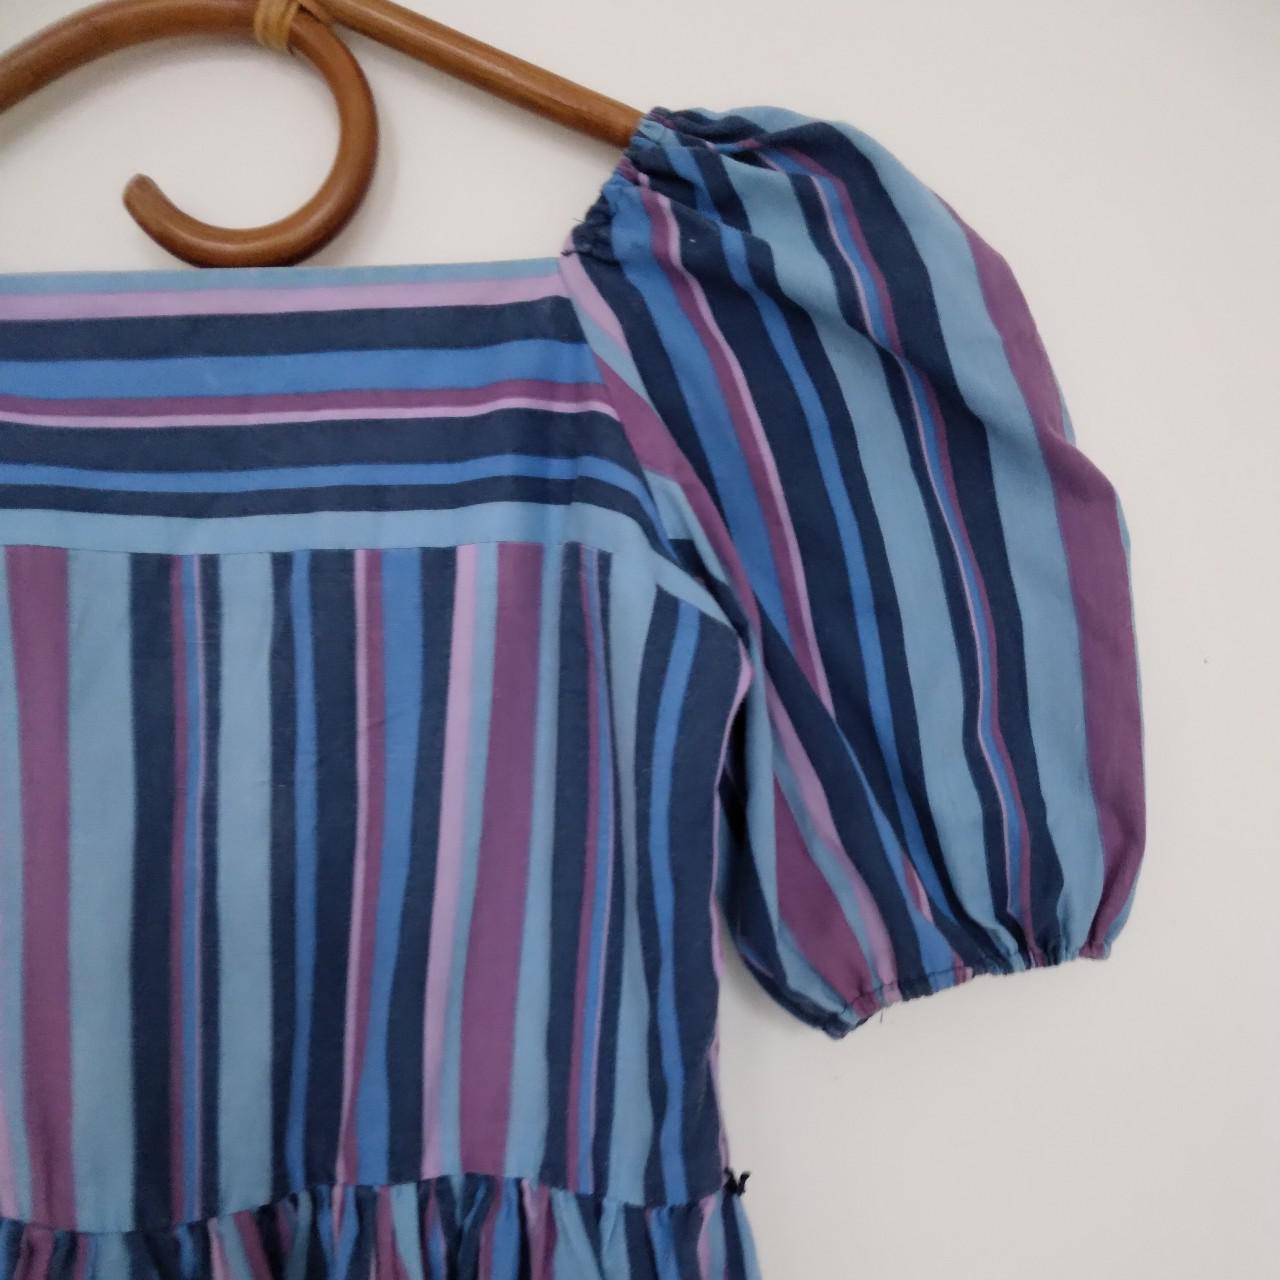 Product Image 2 - Vintage Striped Dress with square